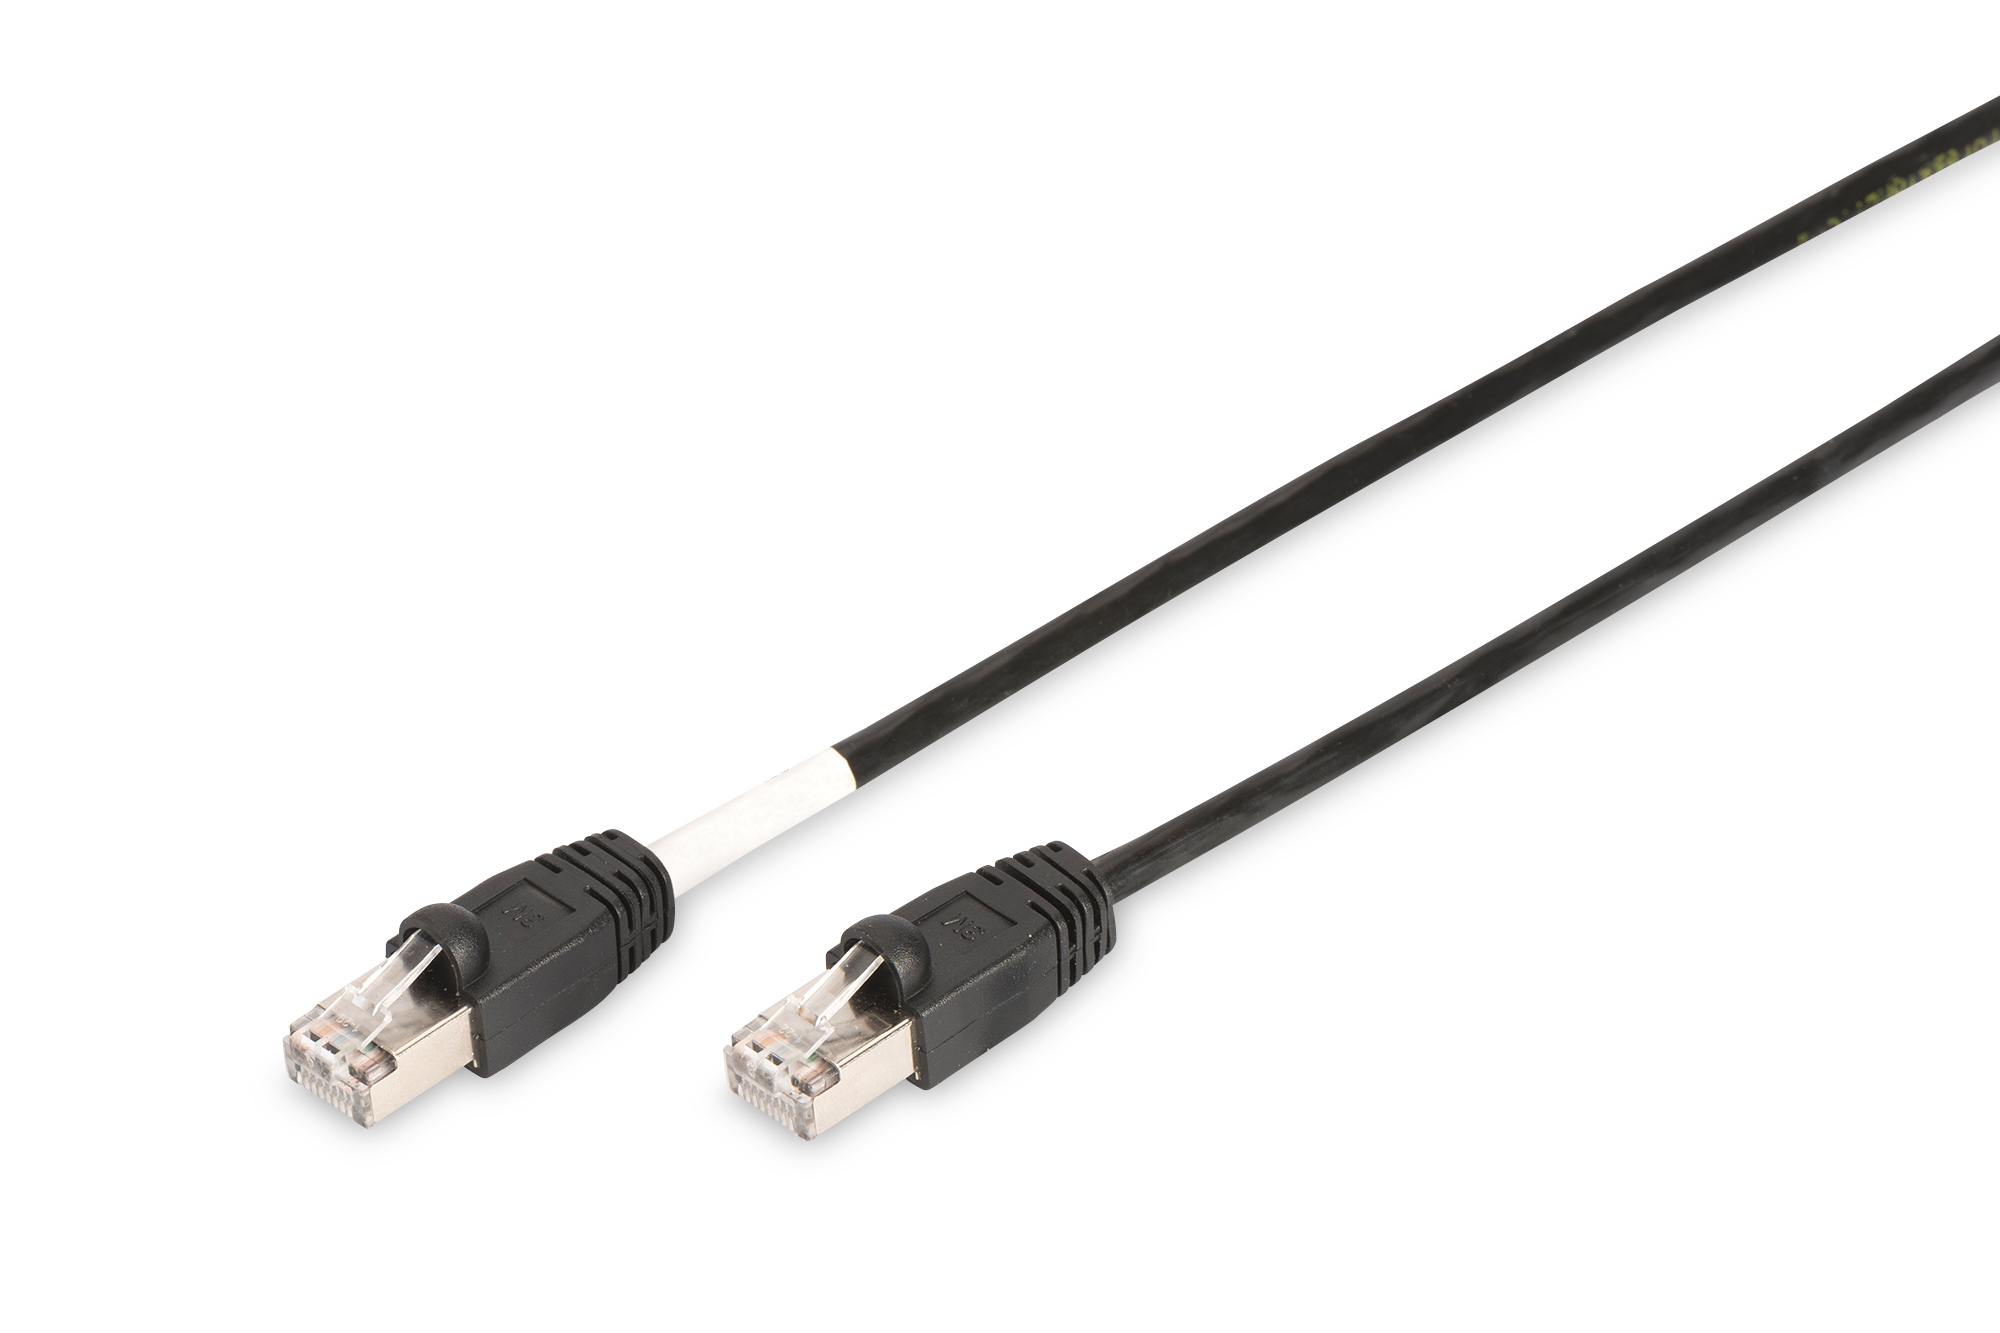 Photos - Cable (video, audio, USB) Digitus CAT 6 S/FTP outdoor patch cord, PE DK-1644-100/BL-OD 